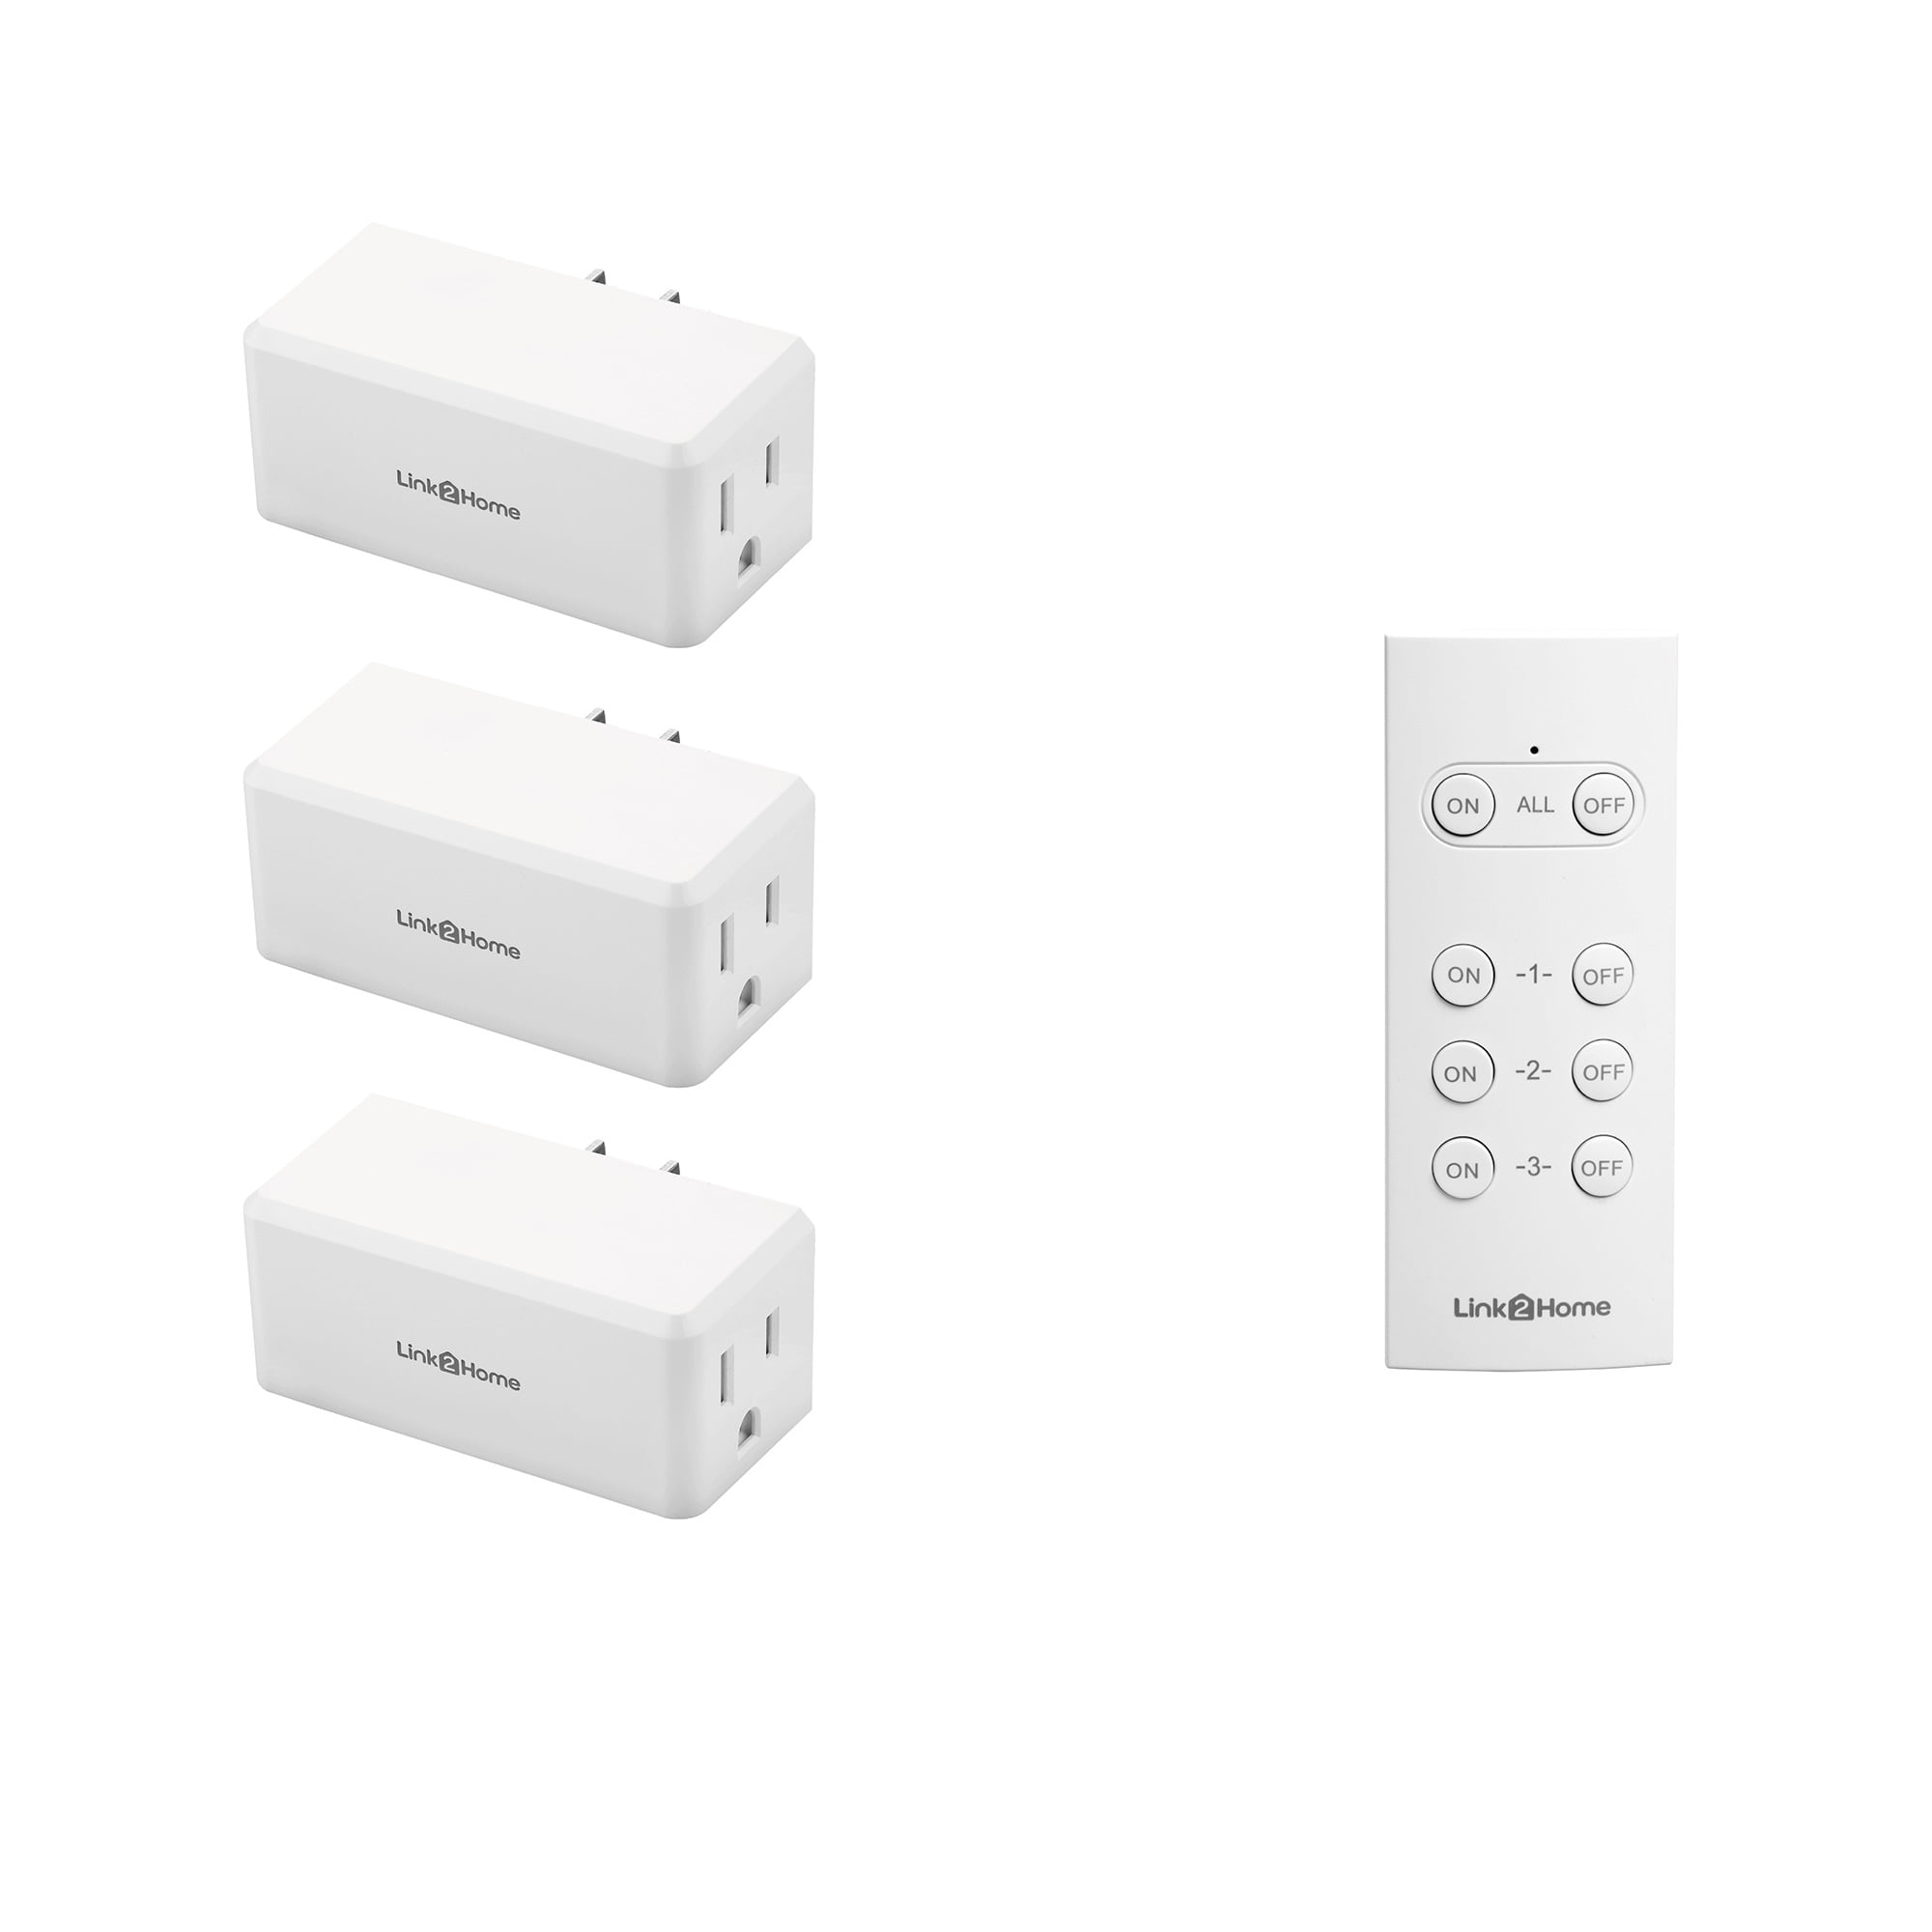 3-Way Wireless Remote Control Wall Switch Set for Switched Lighting & Appliances 